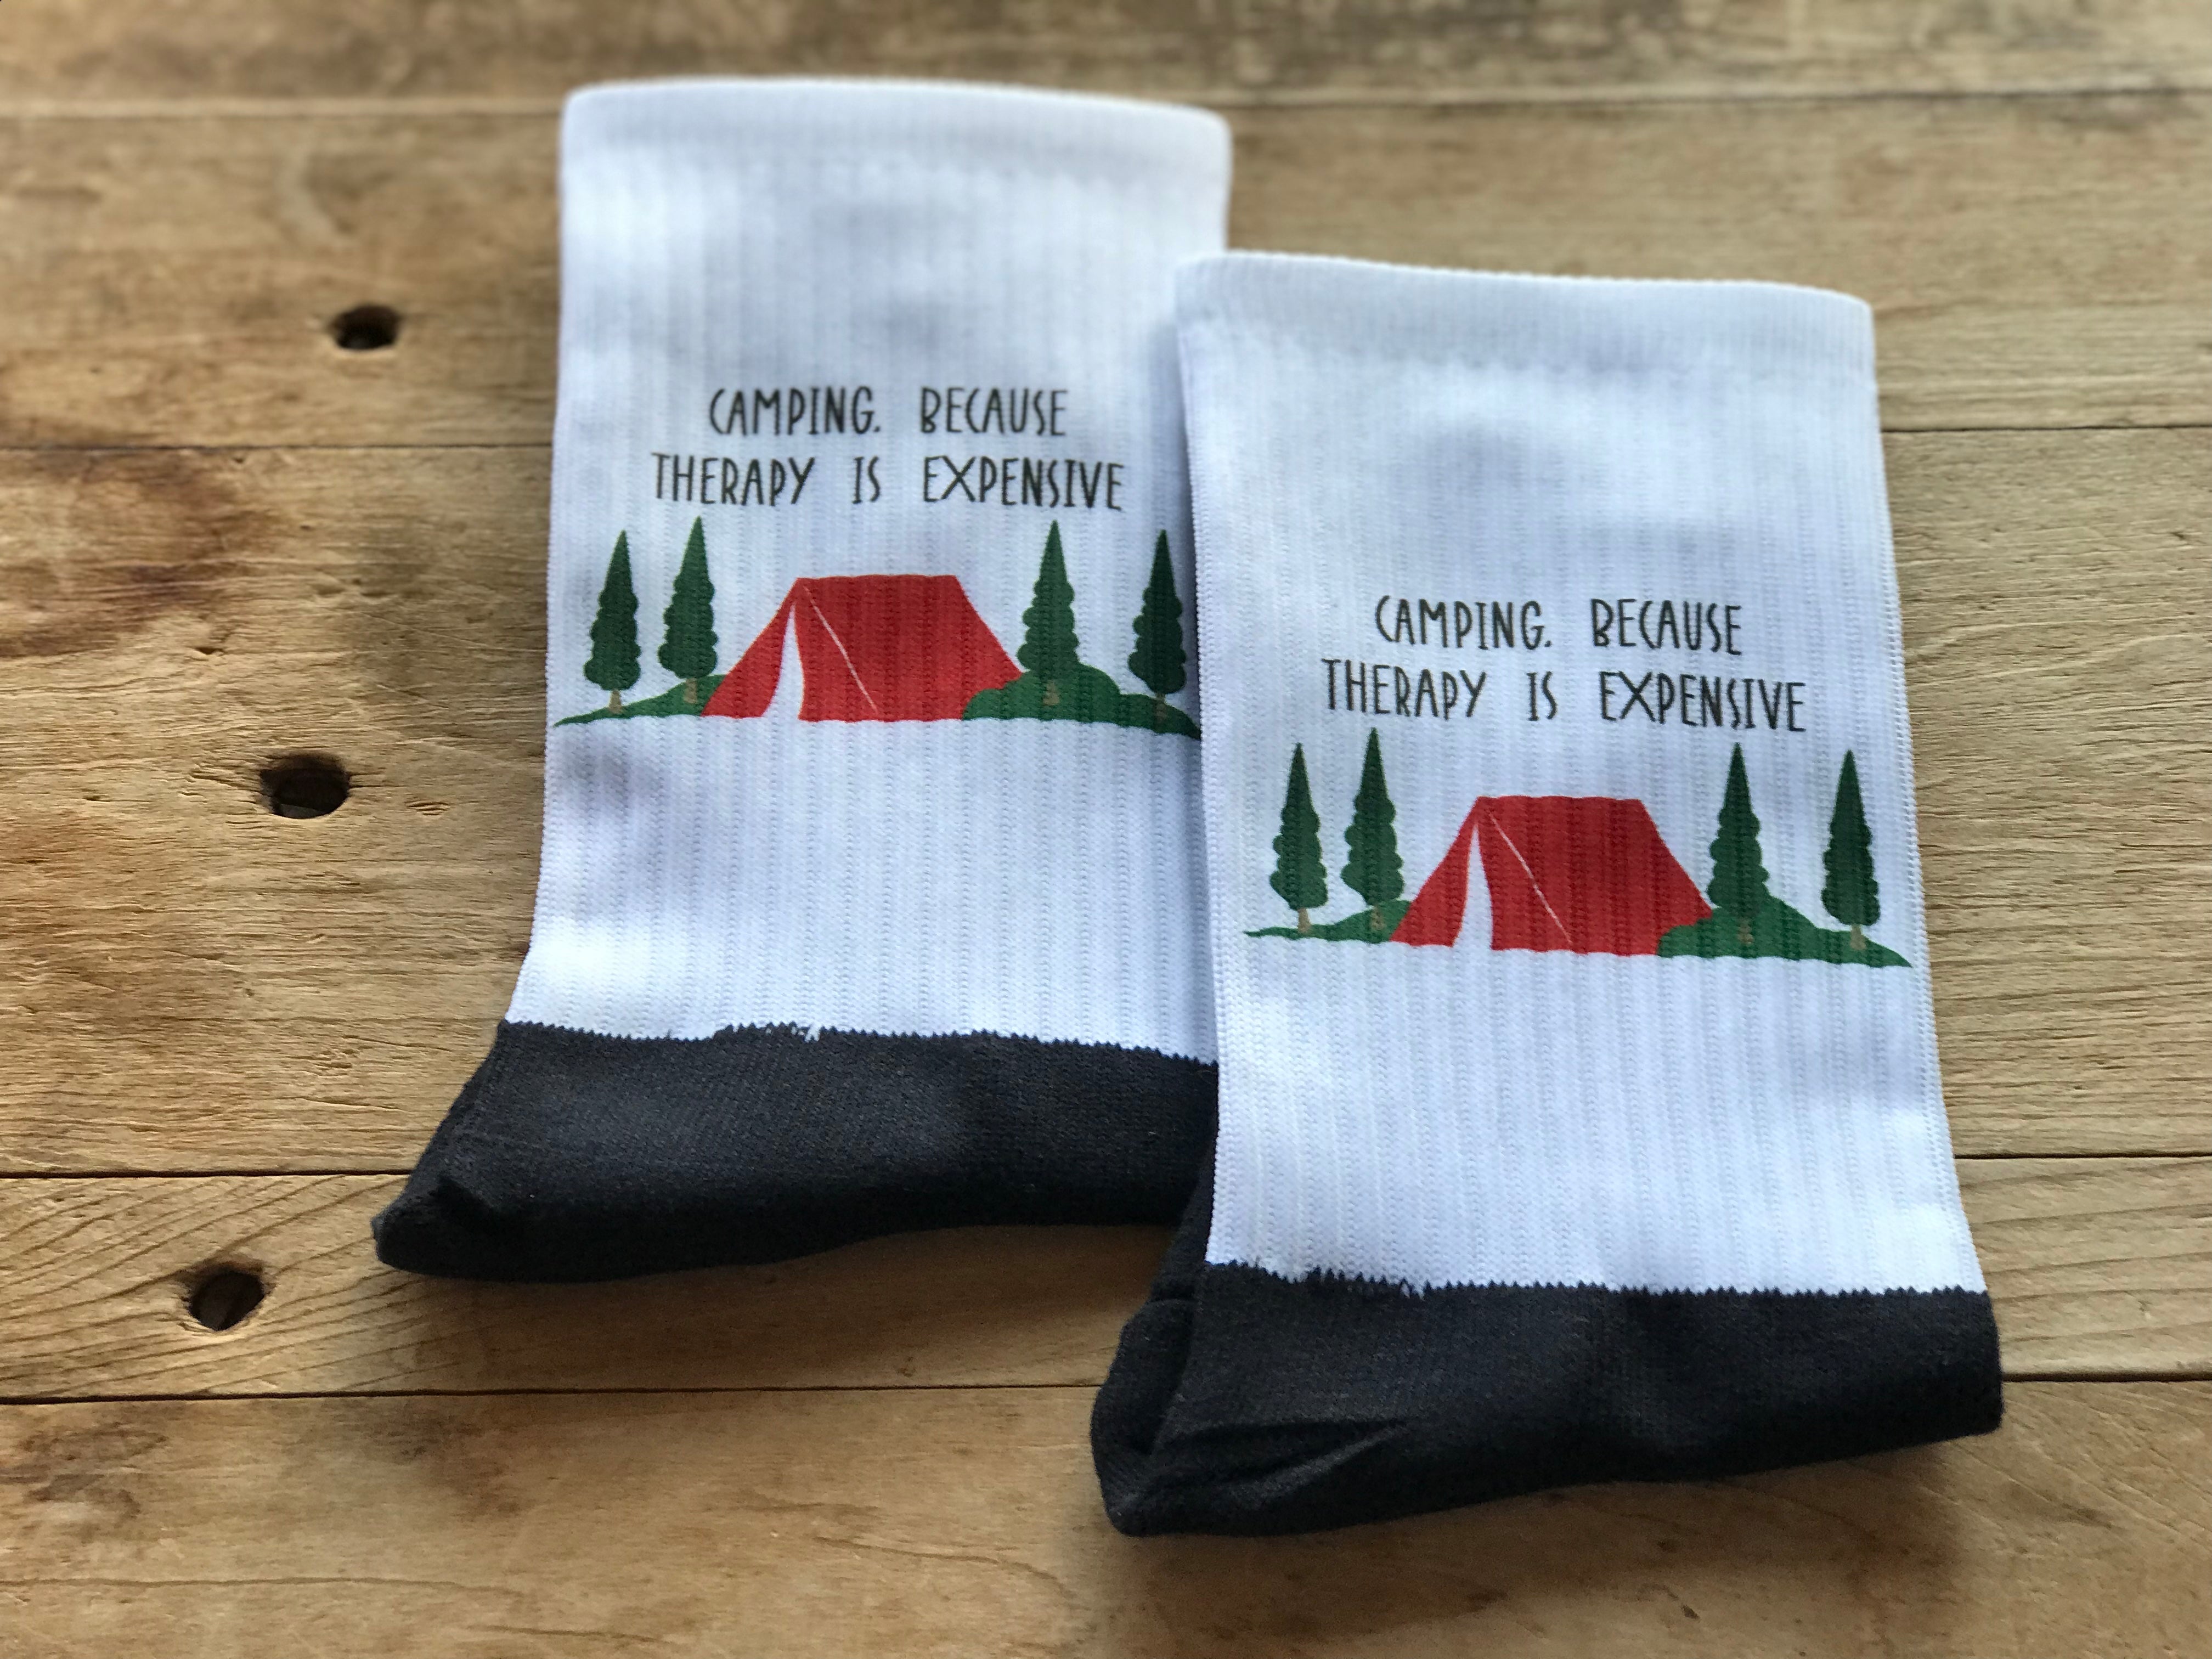 Camping. Because Therapy is Expensive His & Hers Socks